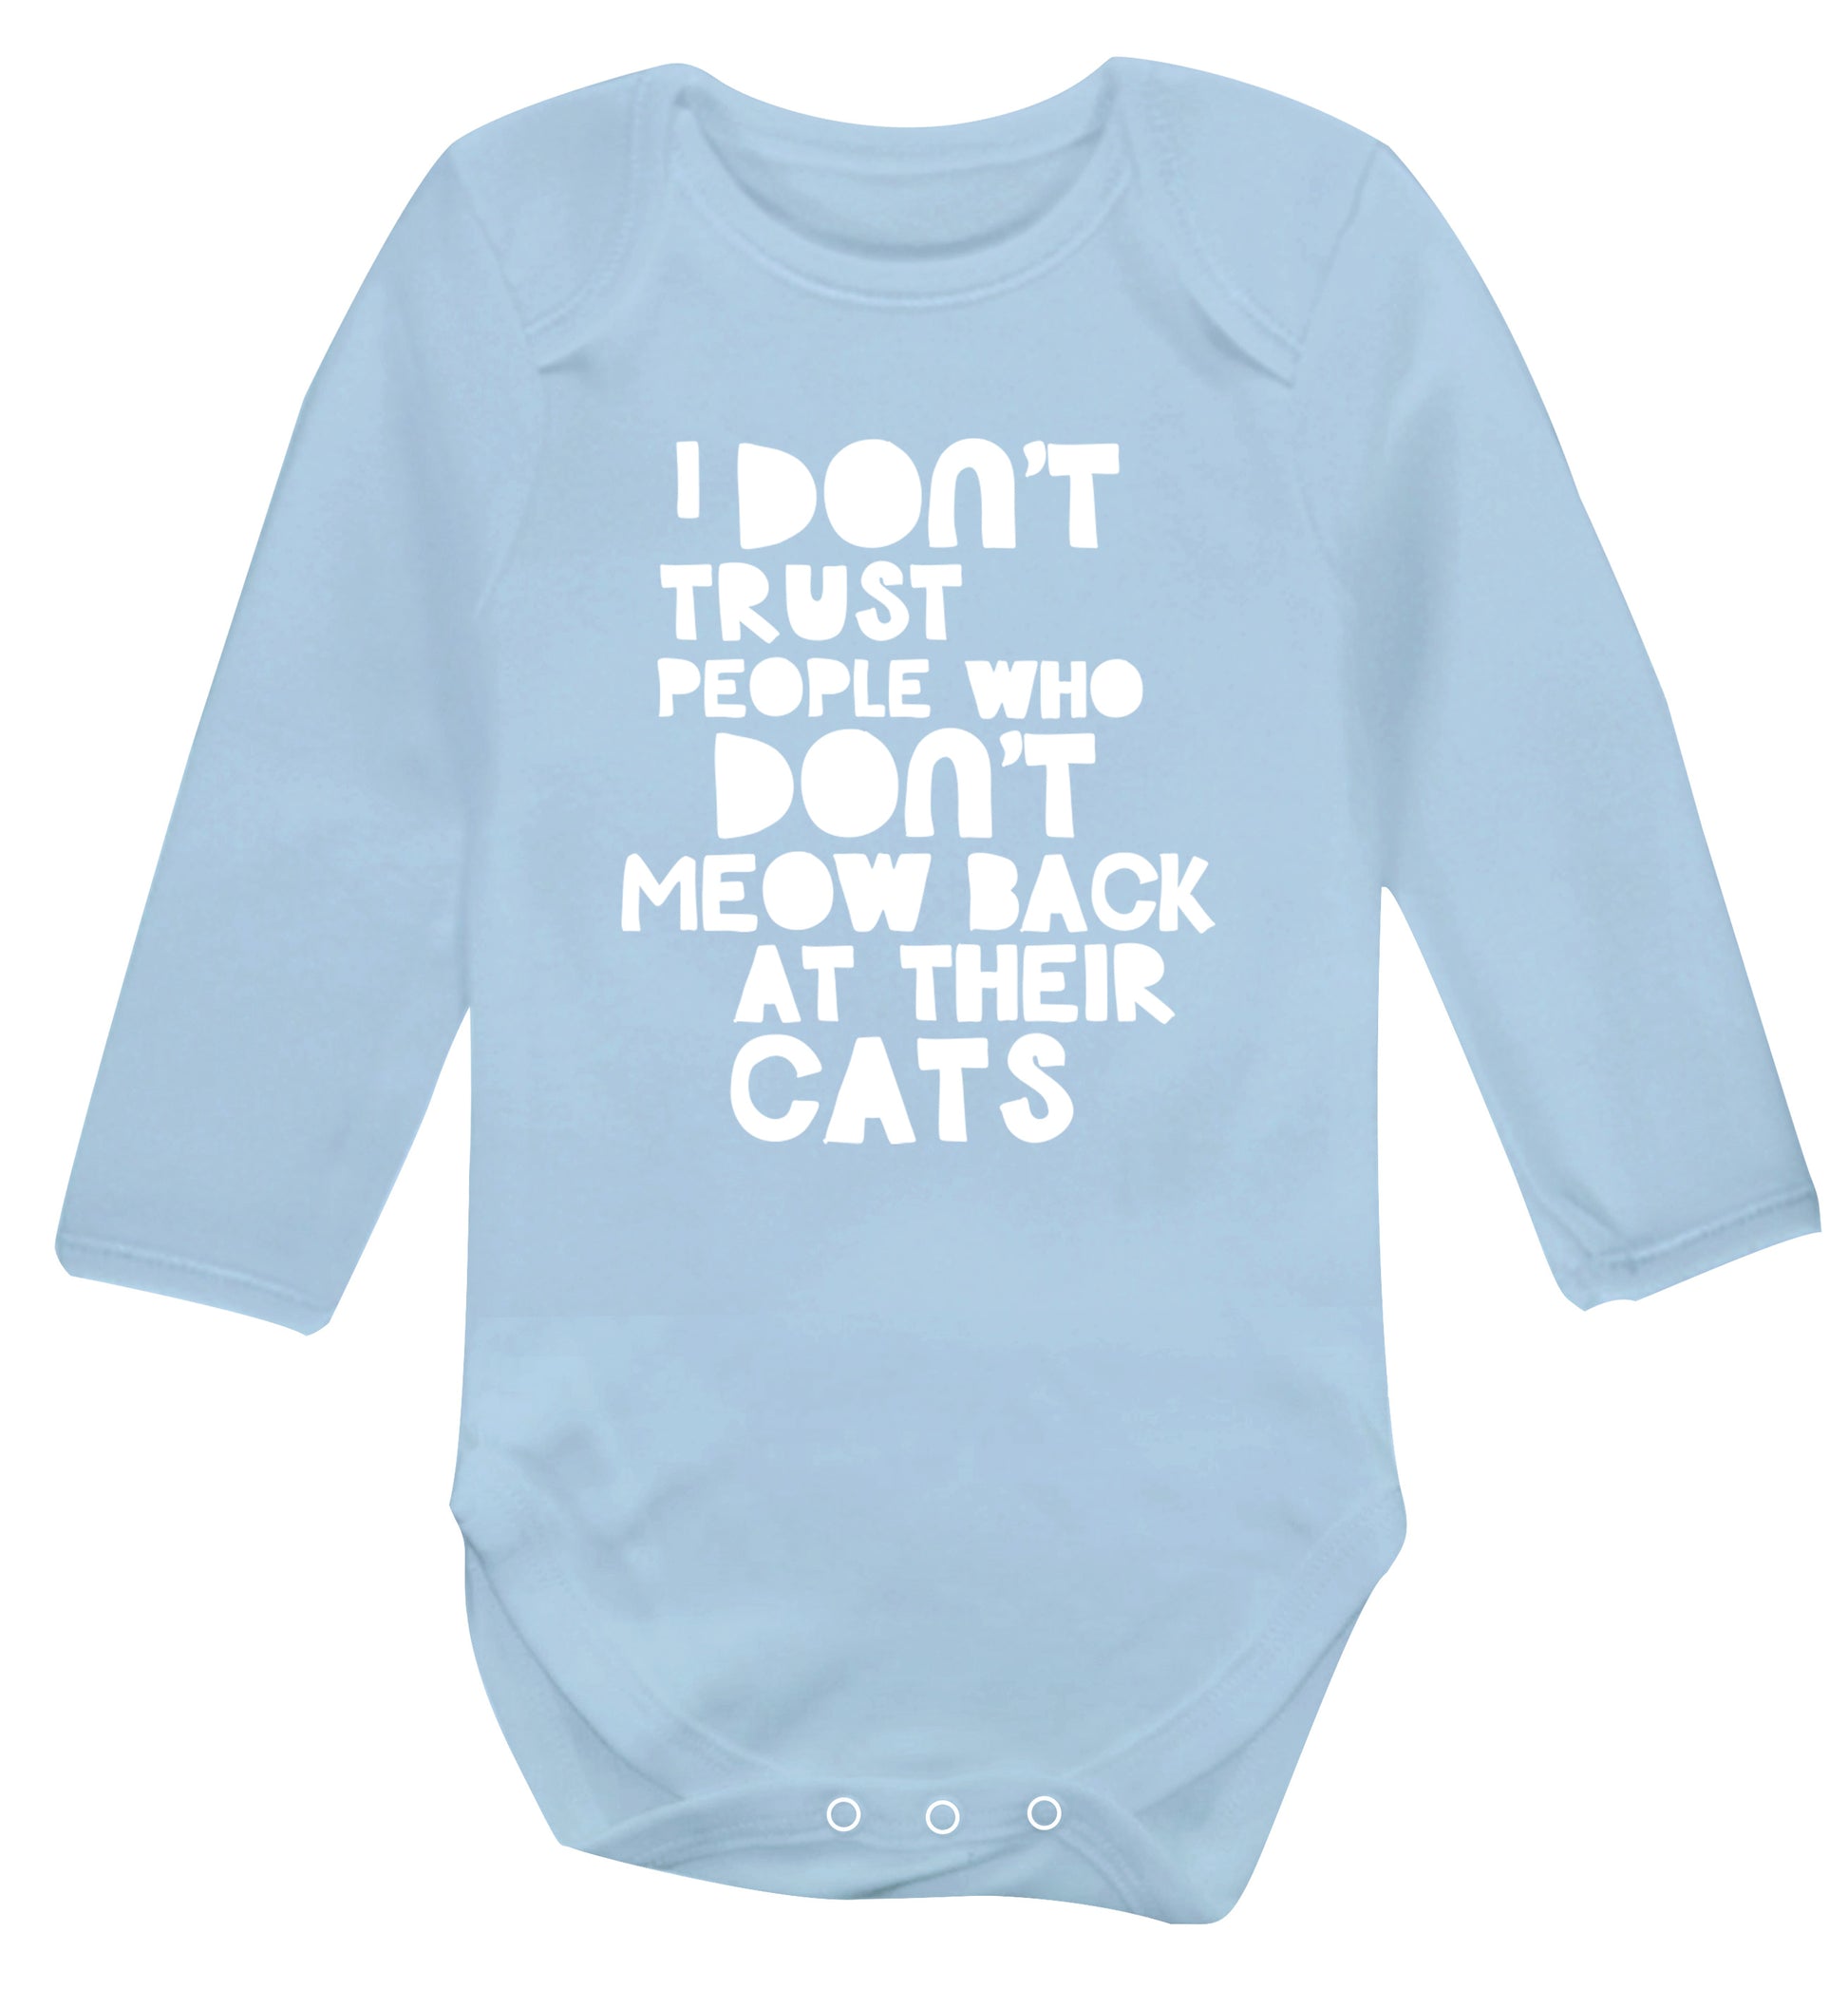 I don't trust people who don't meow back at their cats Baby Vest long sleeved pale blue 6-12 months